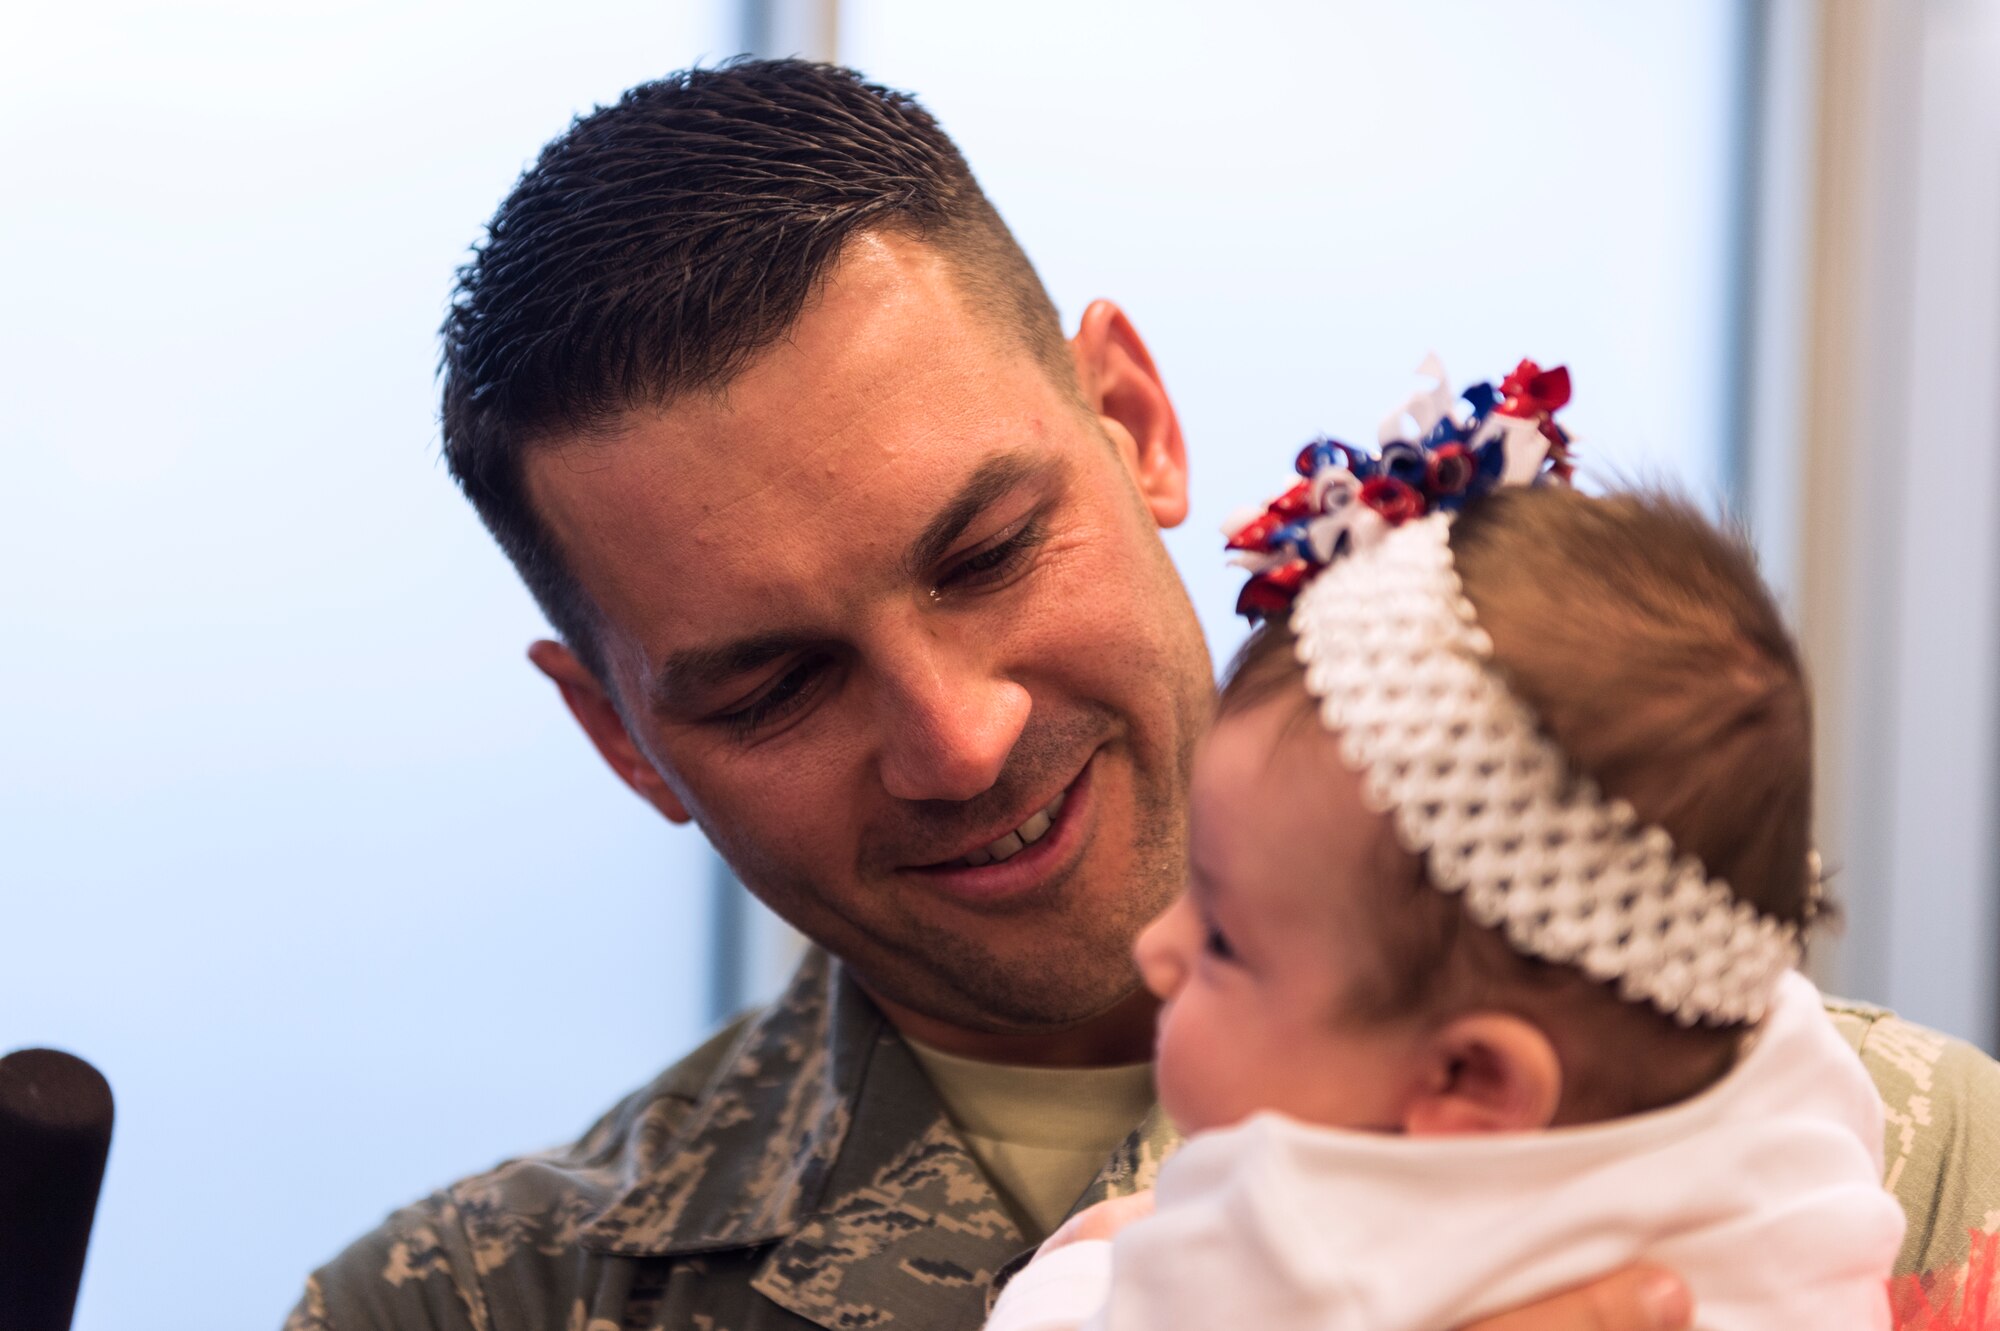 Master Sgt. Daniel Owczarczak, an Airman assigned to the 107th Security Forces Squadron, N.Y., gets to hold his newborn daughter for the first time. Owczarczak was one of more than 30 Airmen from the 107th SFS to return from a six-month deployment to Southwest Asia, Feb. 4-5, 2016. (U.S. Air National Guard photo by Staff Sgt. Ryan Campbell/Released)